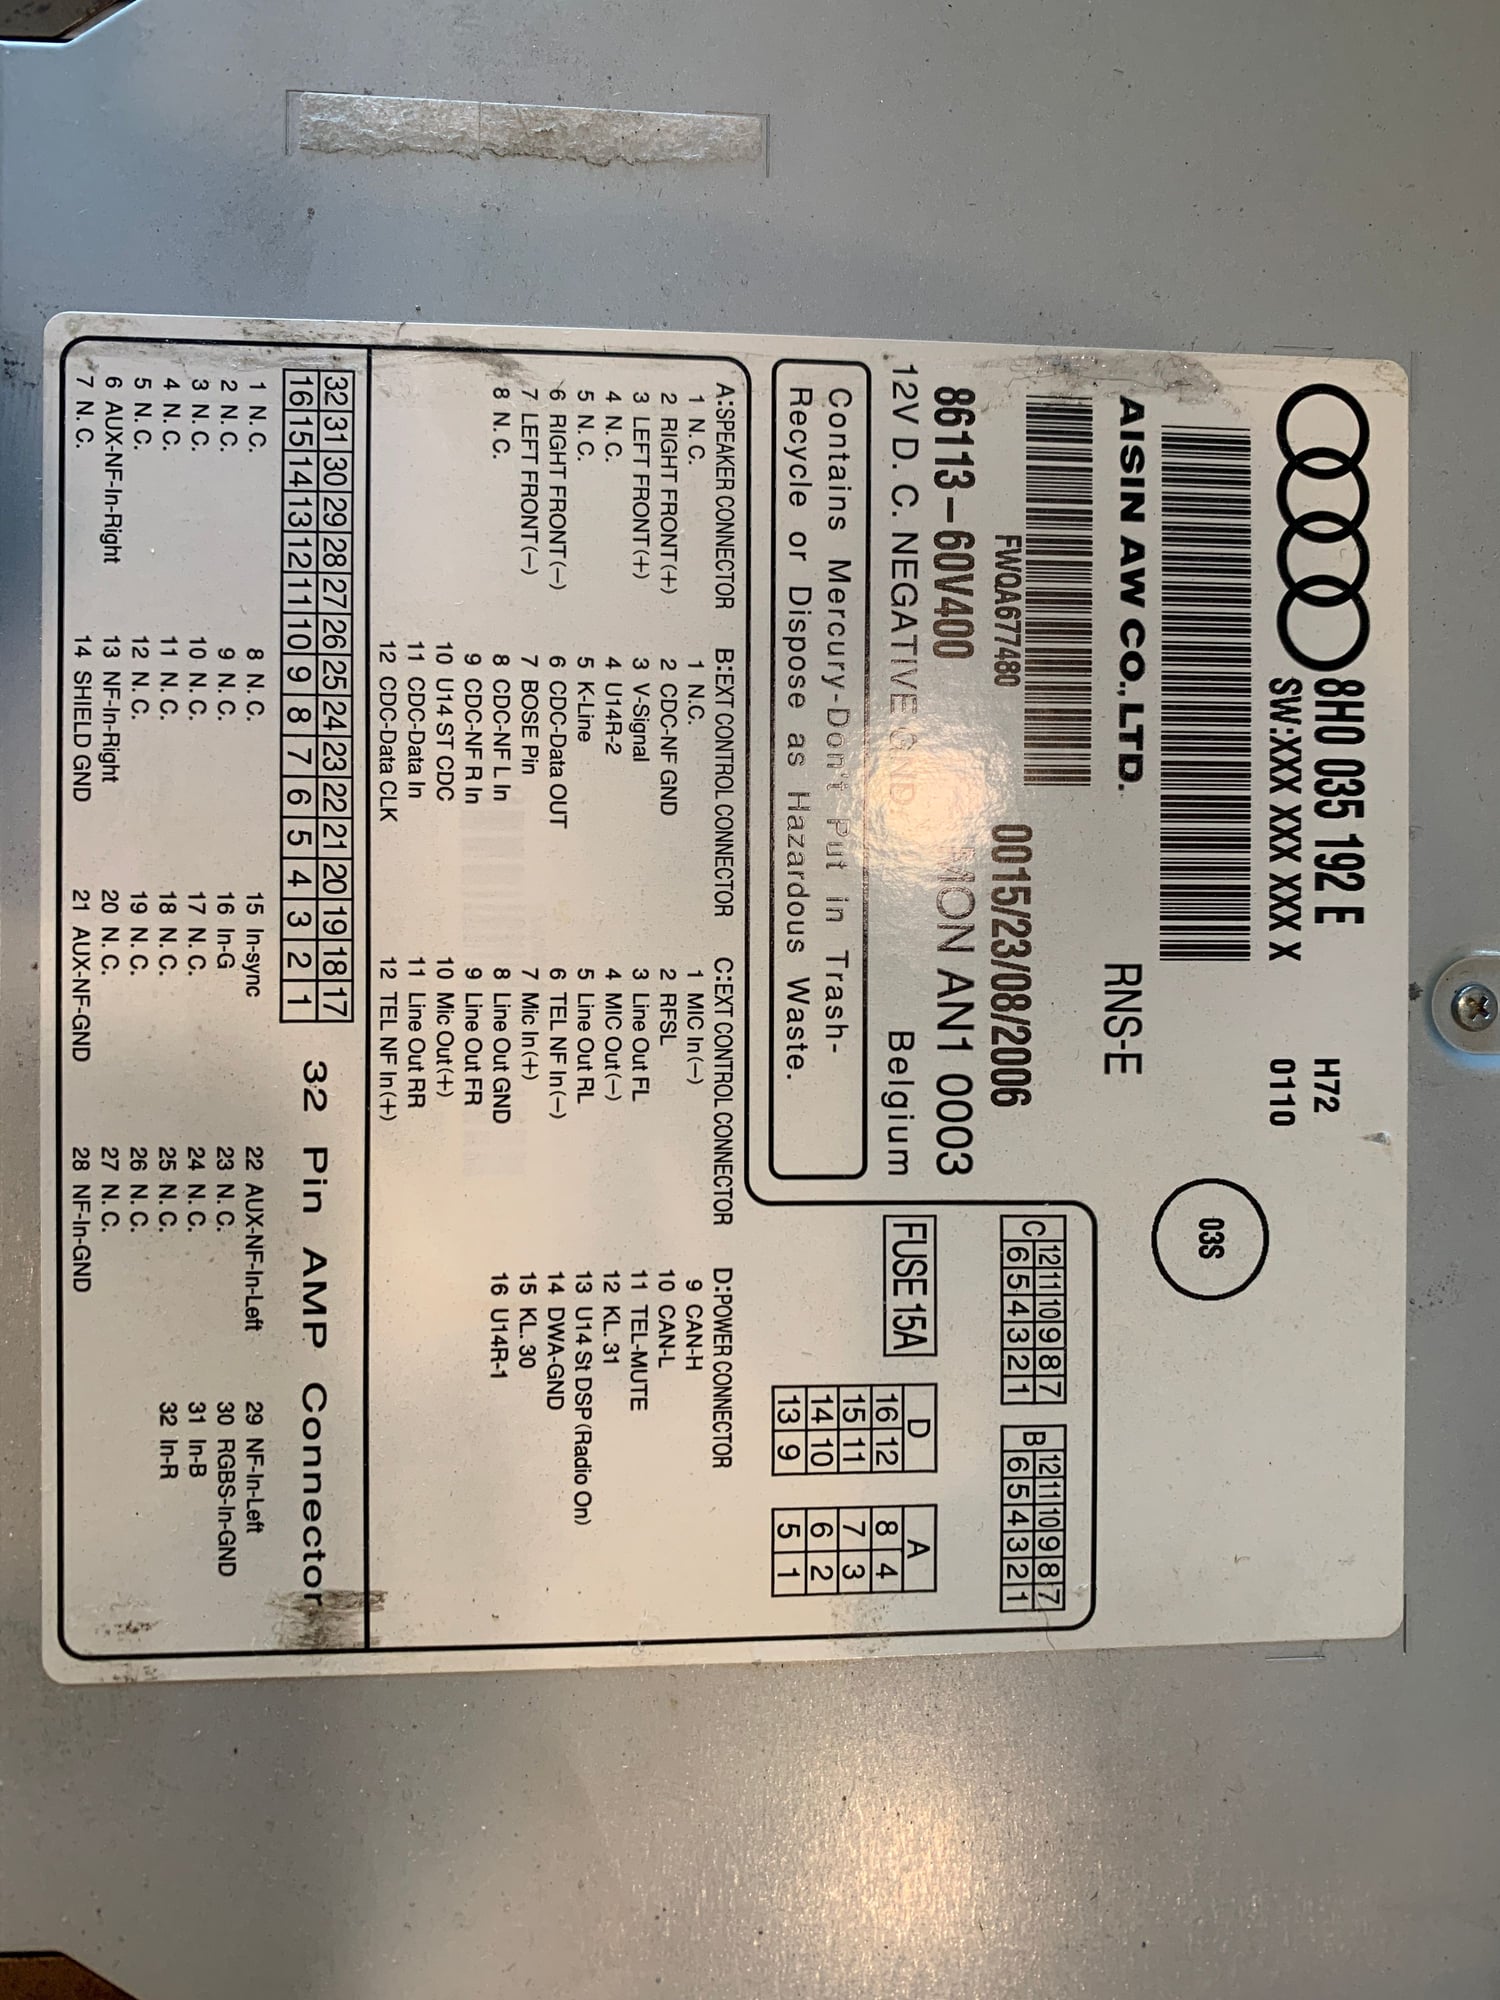 Audio Video/Electronics - Audi RNS-E Navigation Head Unit & 6 CD Changer - Removed from 2007 A4 Quattro Cabrio - Used - 2004 to 2009 Audi A4 Quattro - Richmond, KY 40475, United States